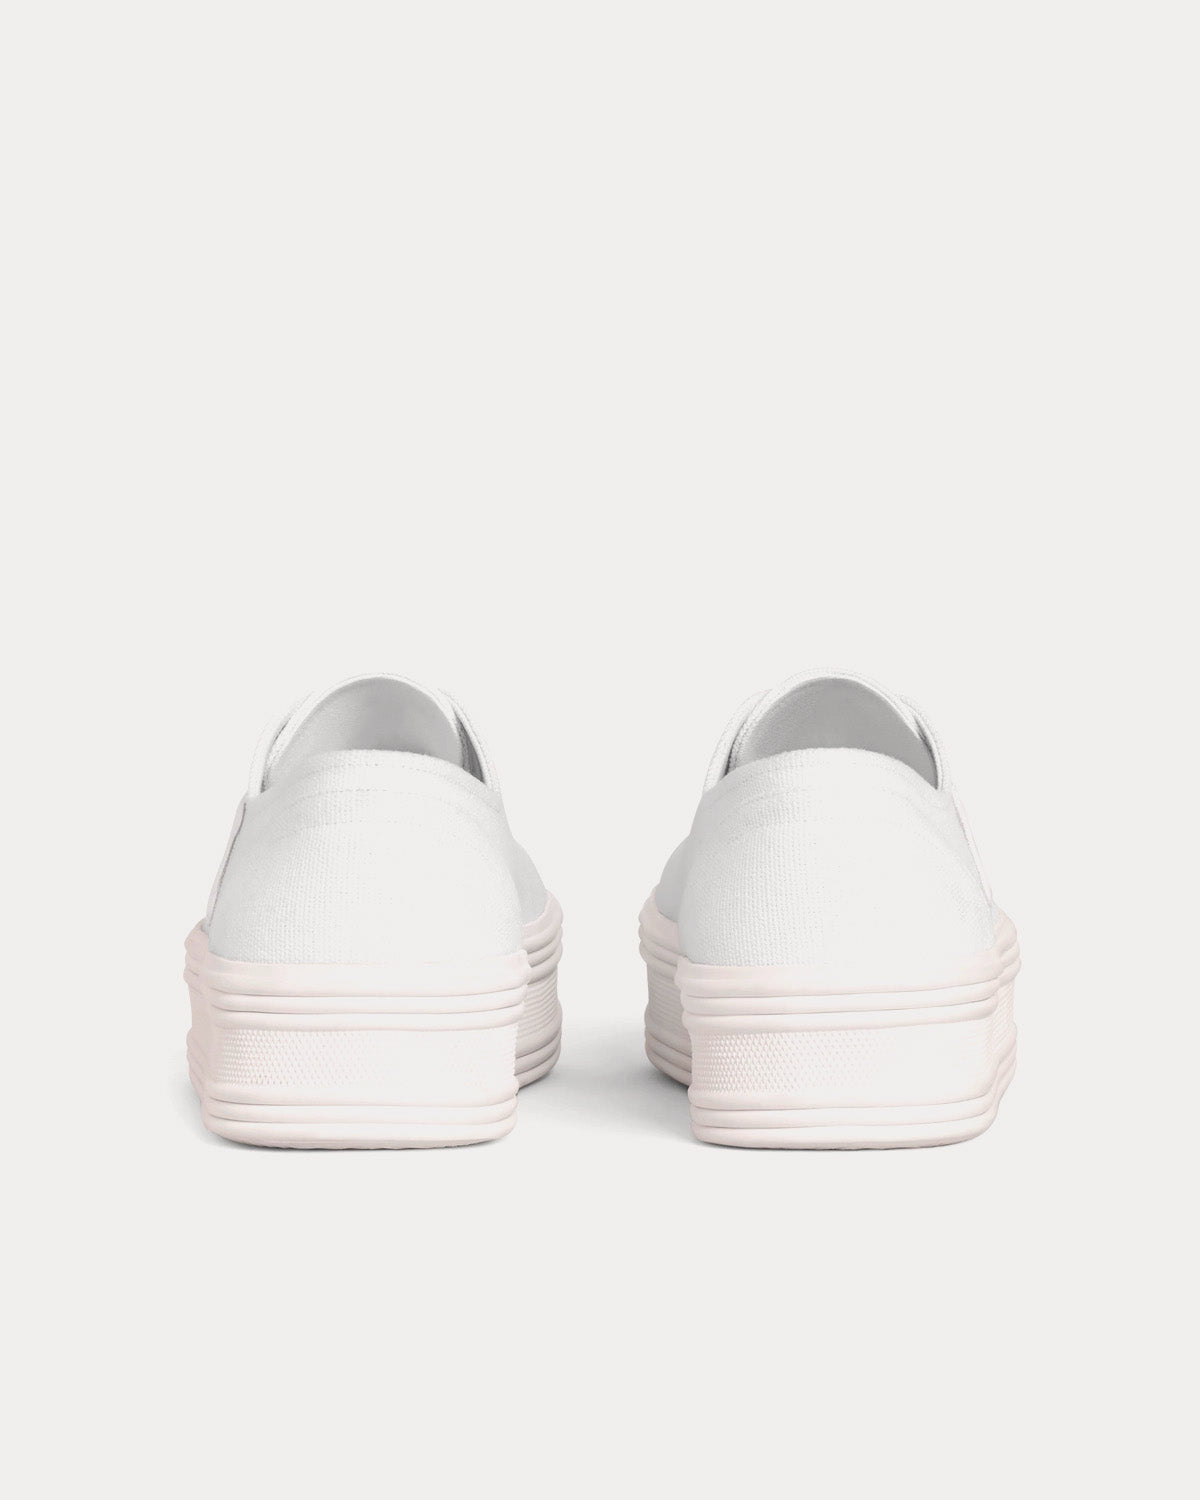 Celine - Jane Lace-Up Canvas & Calfskin Optic White Low Top Sneakers